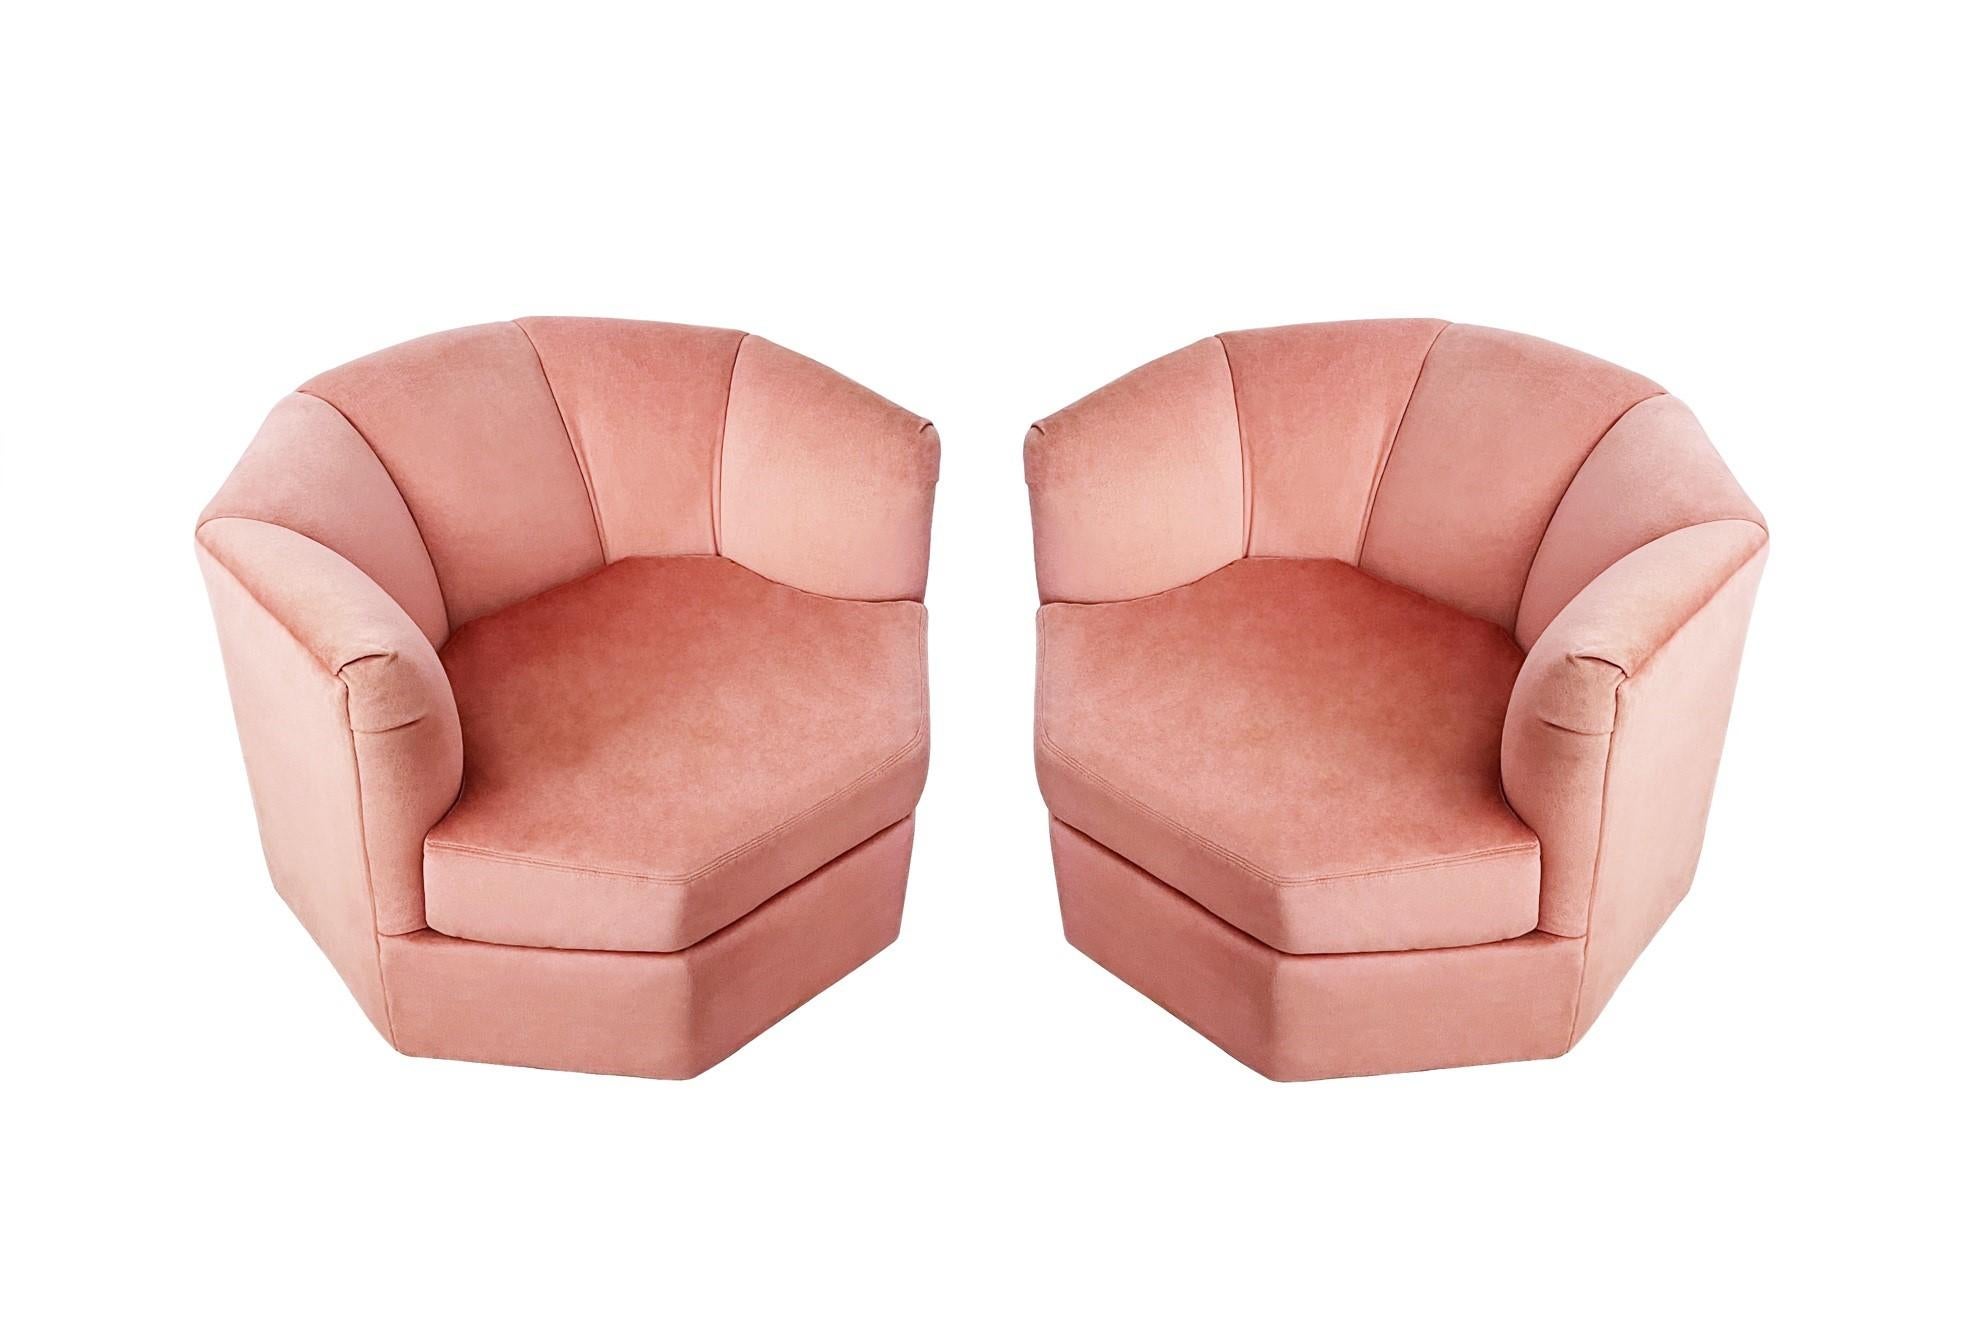 1970s Hexagonal Club Chairs in a Dusty Rose Velvet For Sale 1